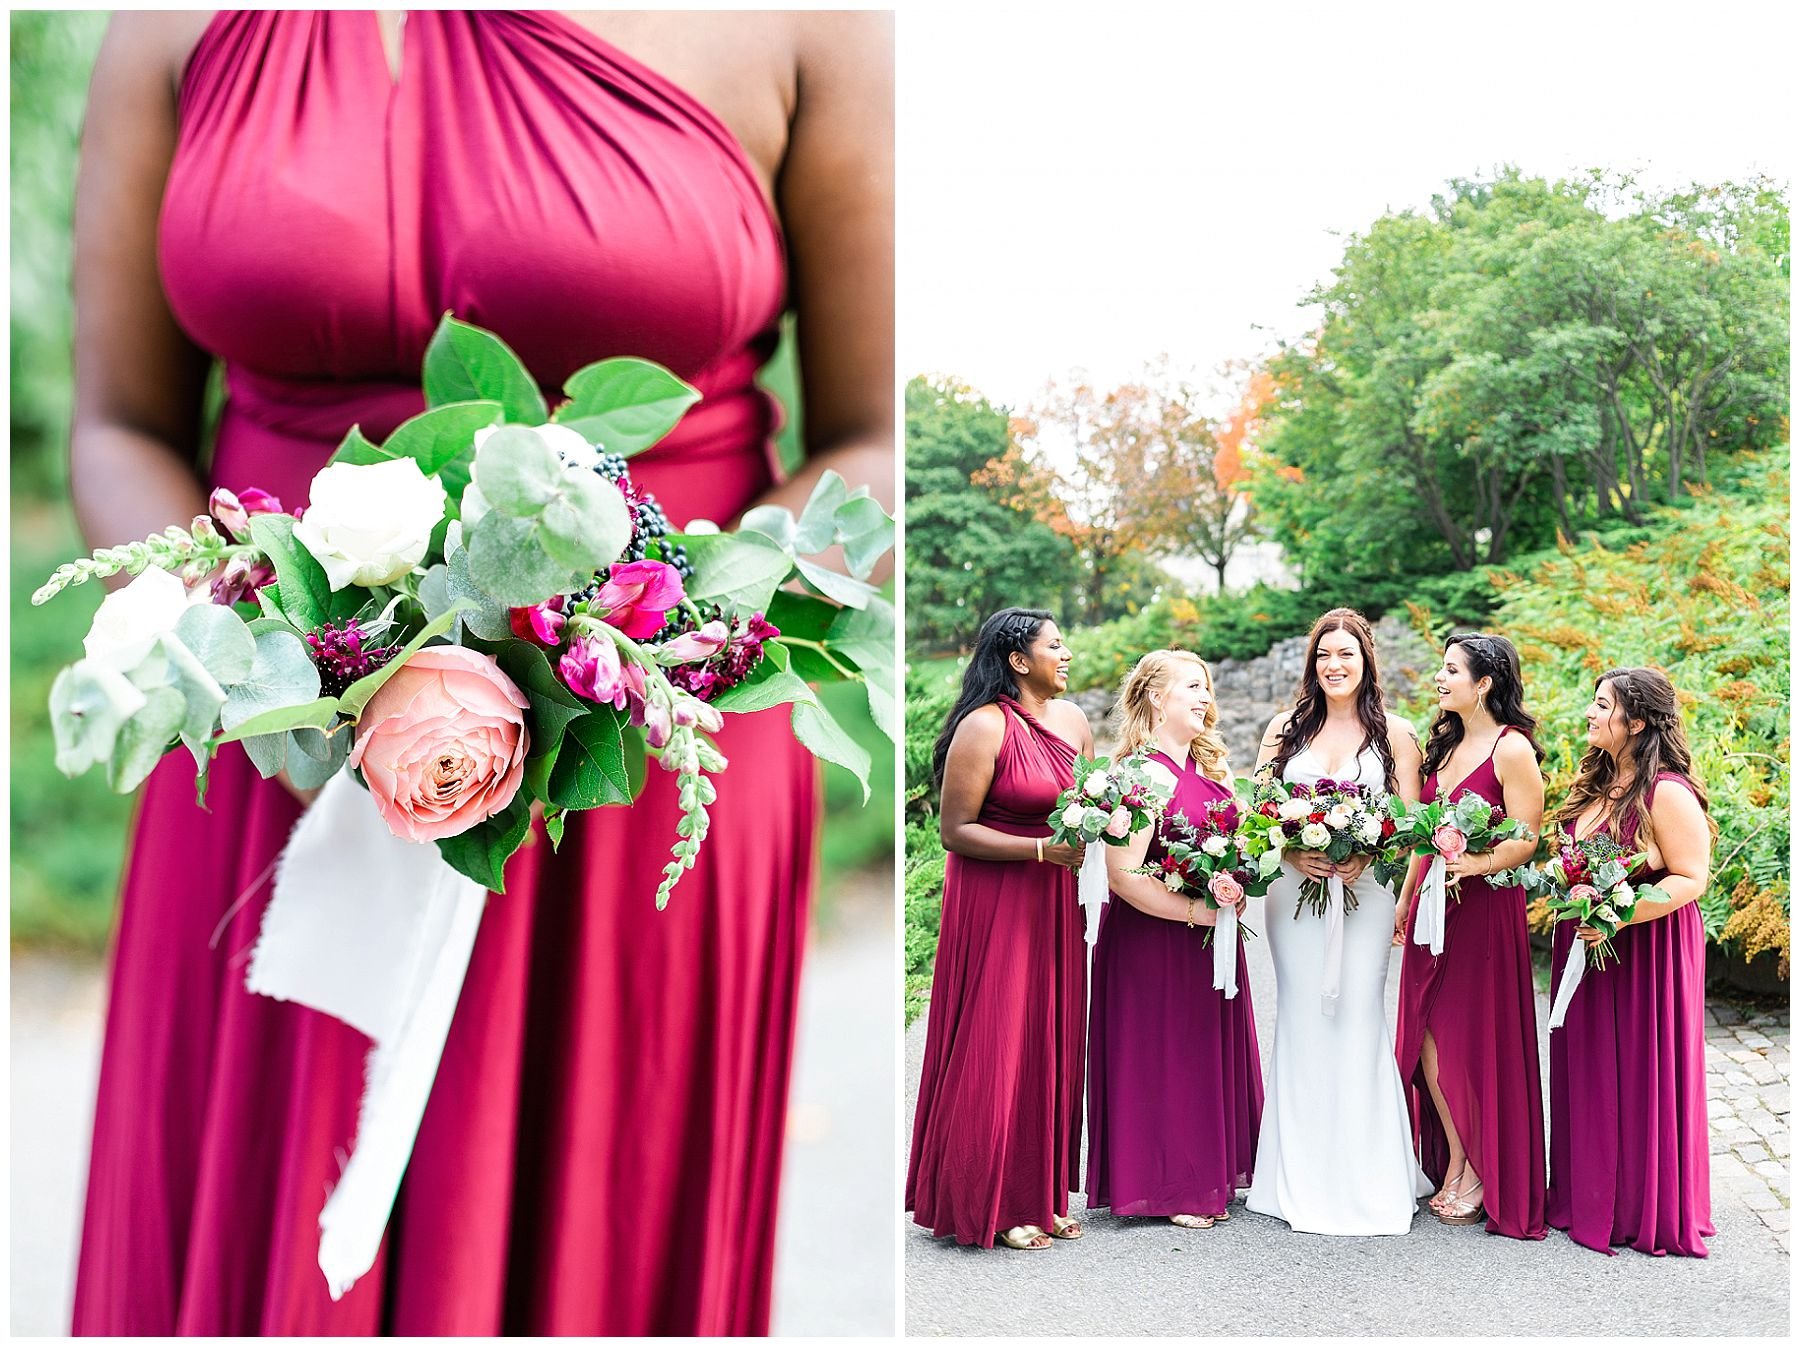 Burgundy bridesmaids dress with fall bouquets